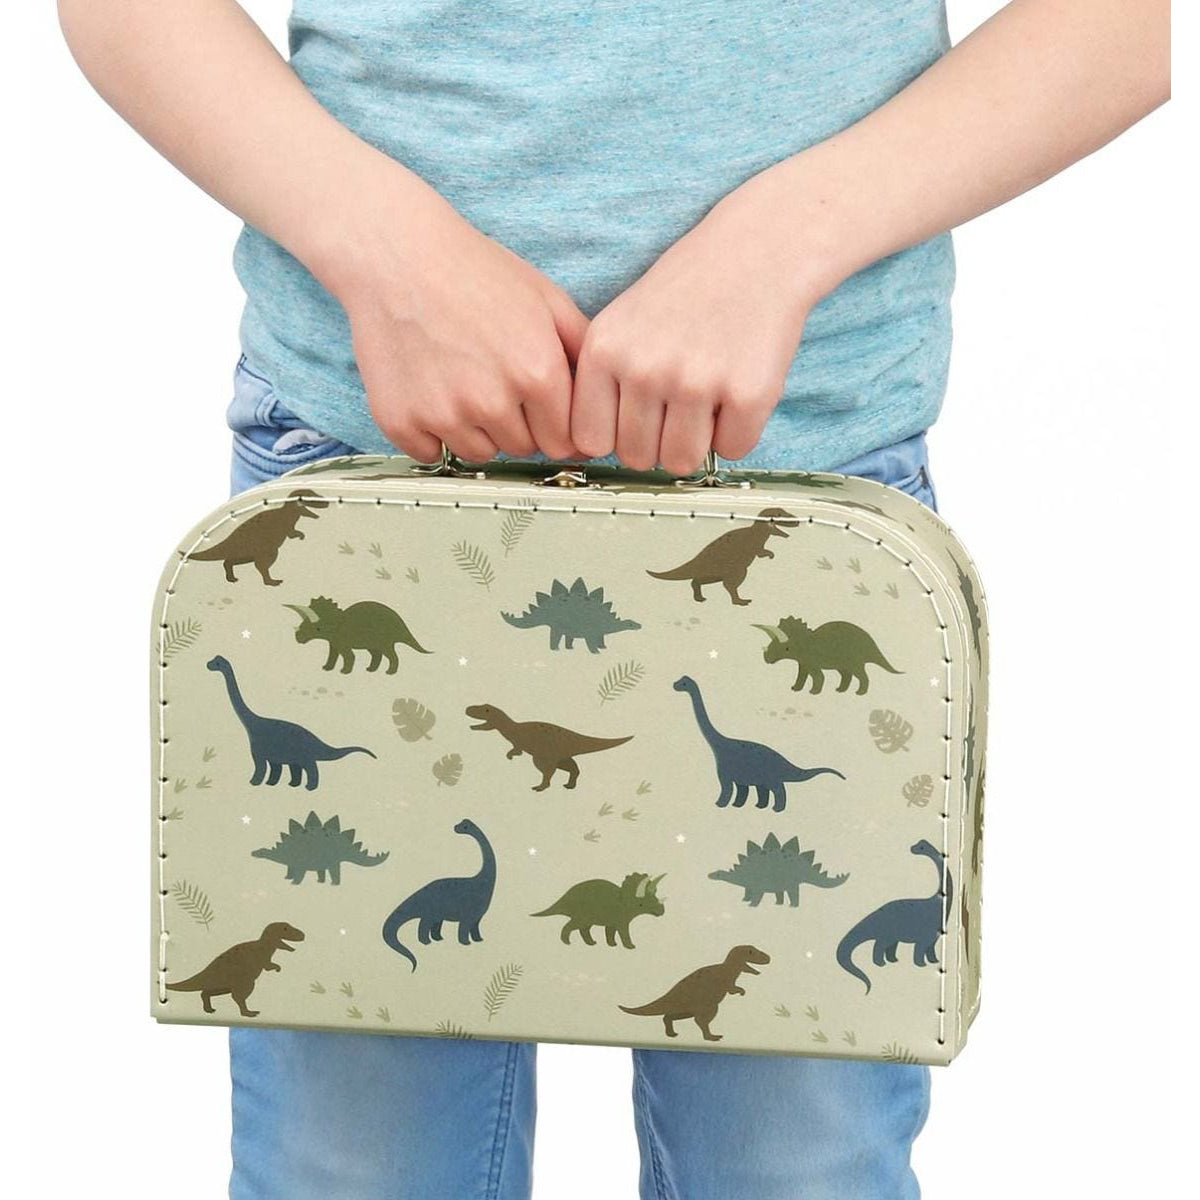 a-little-lovely-company-suitcase-set-dinosaurs- (8)